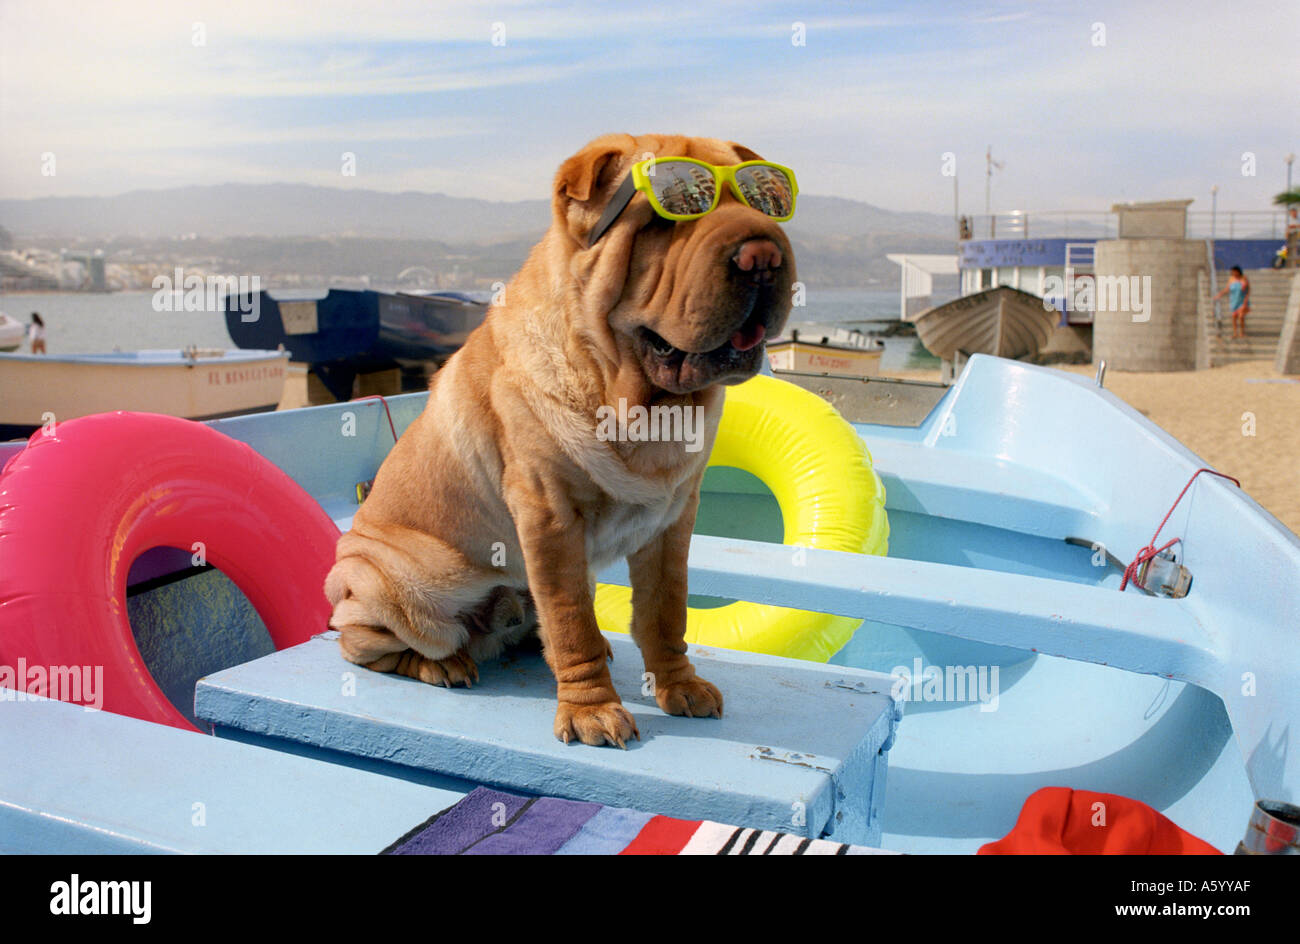 FUN DOG HOLIDAY SUNGLASSES BEACH BOAT Dog wearing sunglasses poses for fun in colourful fishing boat on beach in holiday setting Stock Photo